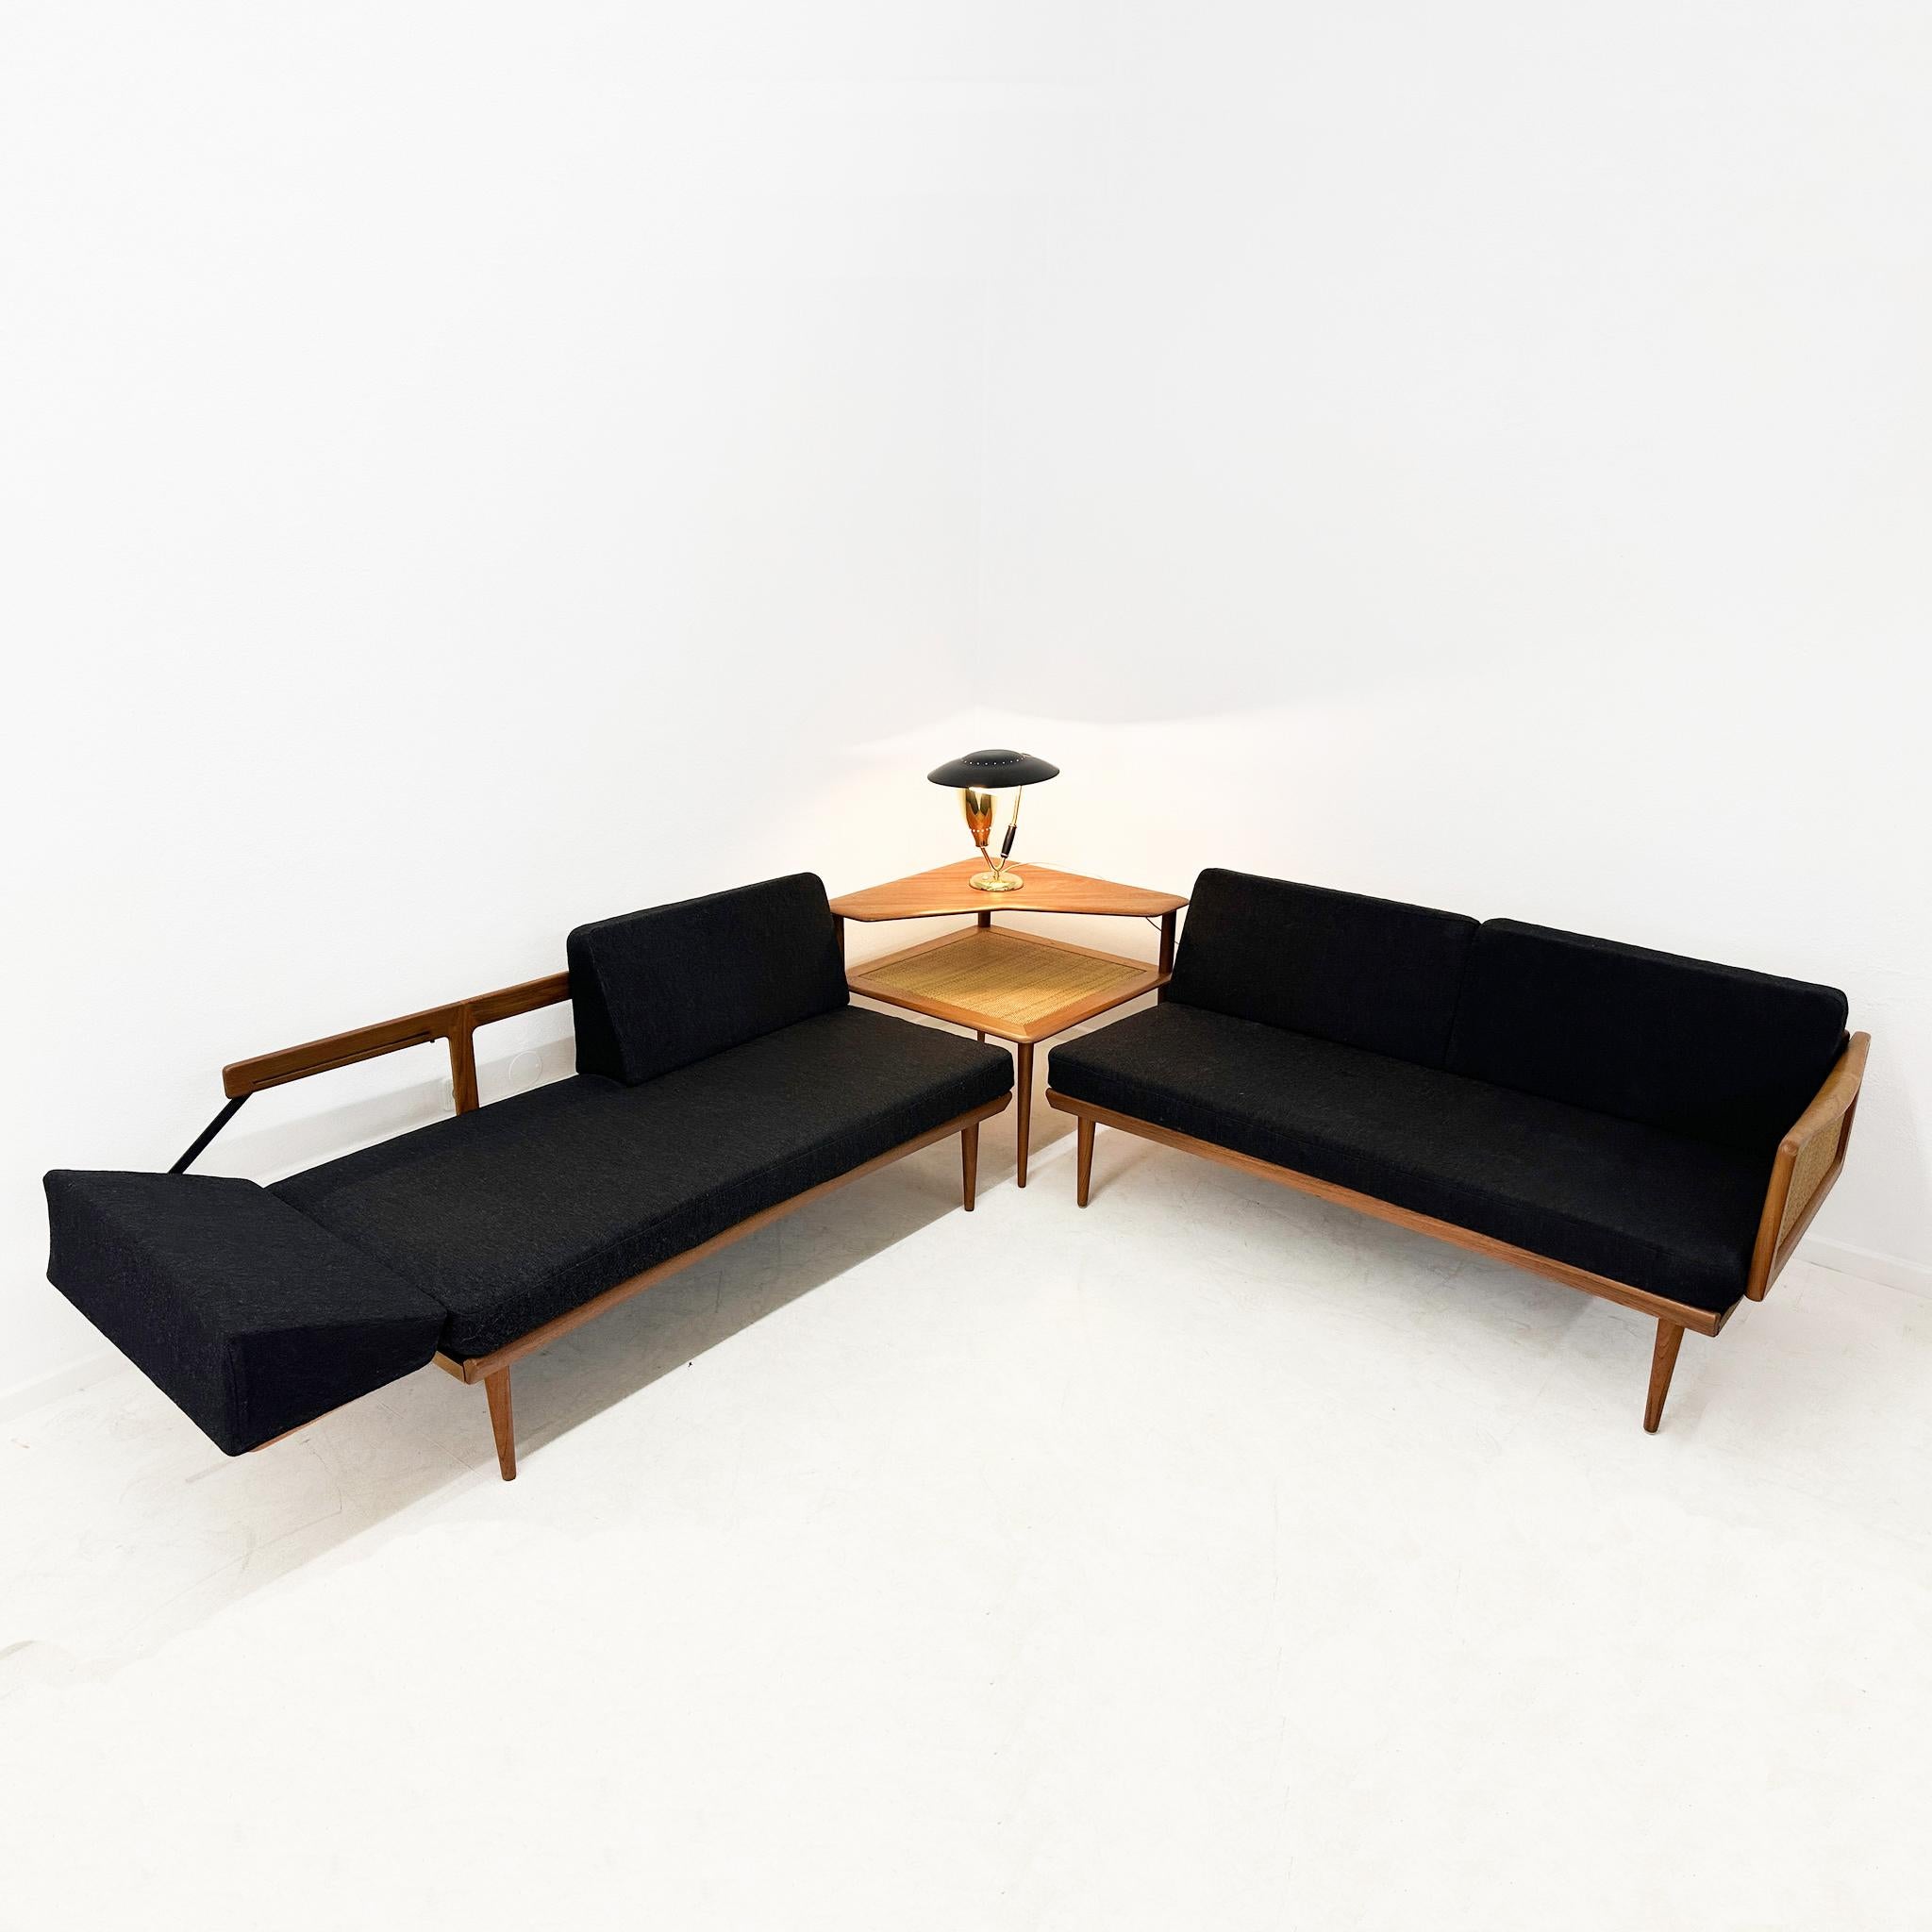 Modular living room set  designed by the Danish architects Peter Hvidt & Orla Mølgaard Nielsen. It was produced in Denmark by France & Daverkosen during the 1950's. The set includes two modular 2-seater sofa and a corner coffee table model FD 519.